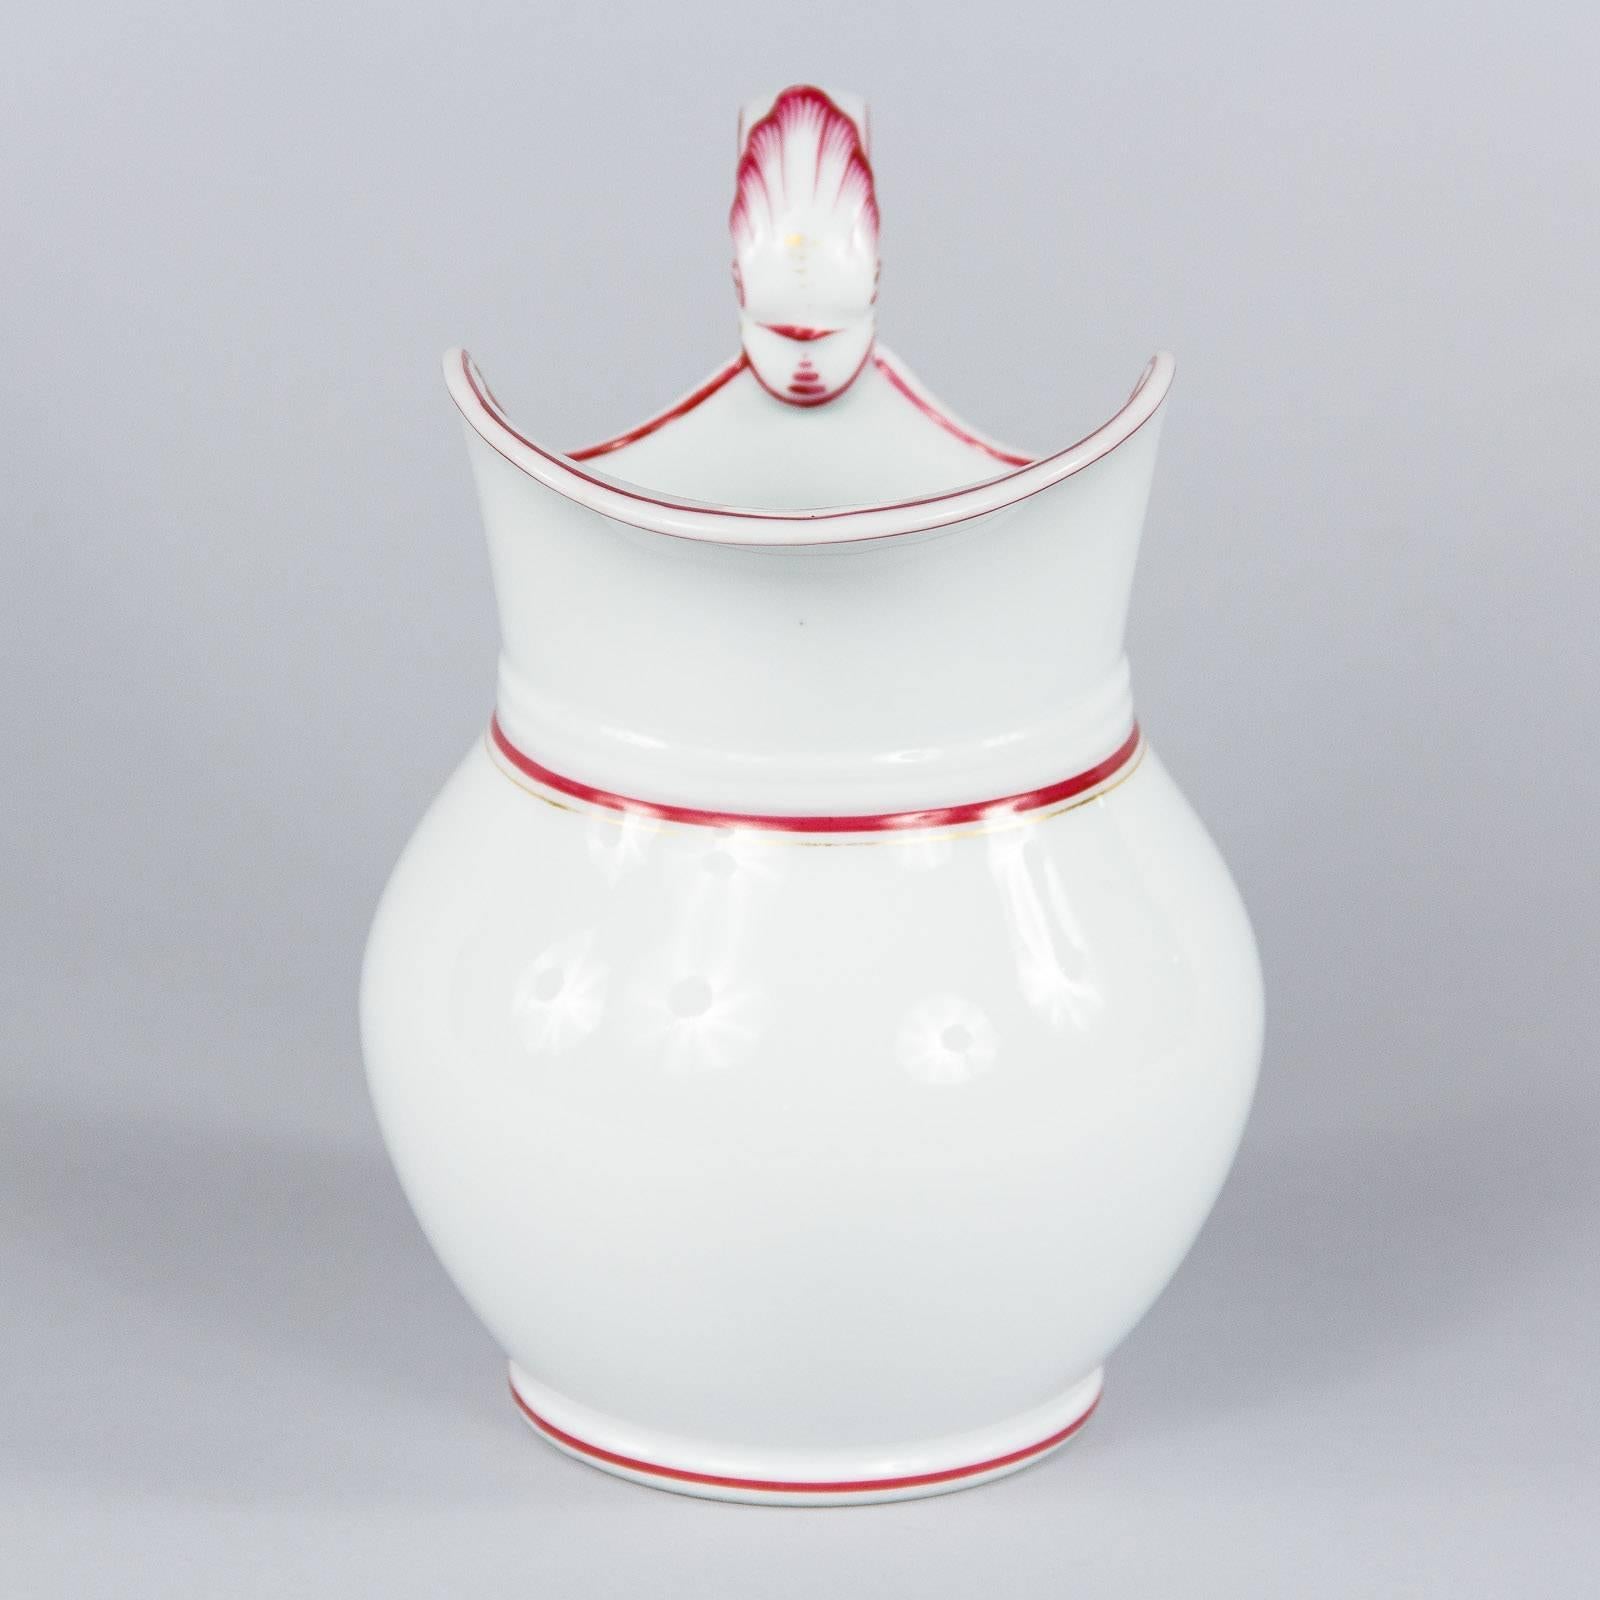 A French pitcher in white ceramic with painted red trim and gilt details, circa 1950. Charming proportions, with a round belly and wide mouth. Cranberry red trim lines are painted throughout, including around the base, inside and outside the profile